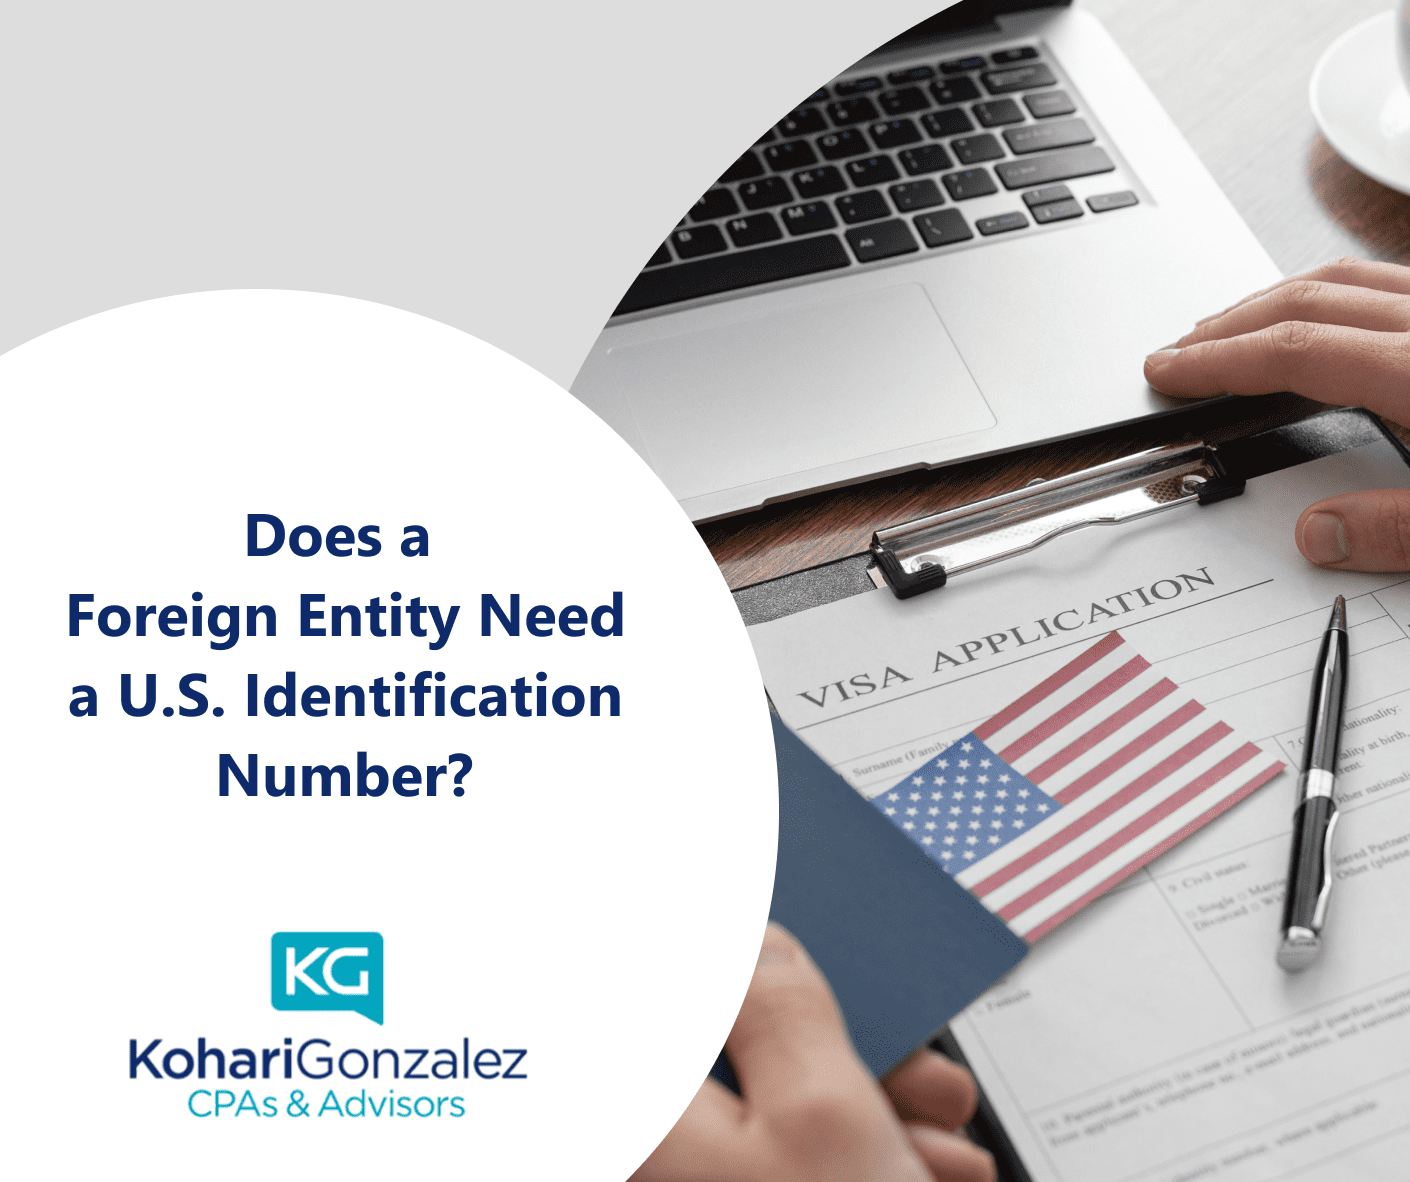 Does a Foreign Entity Need a U.S. Identification Number